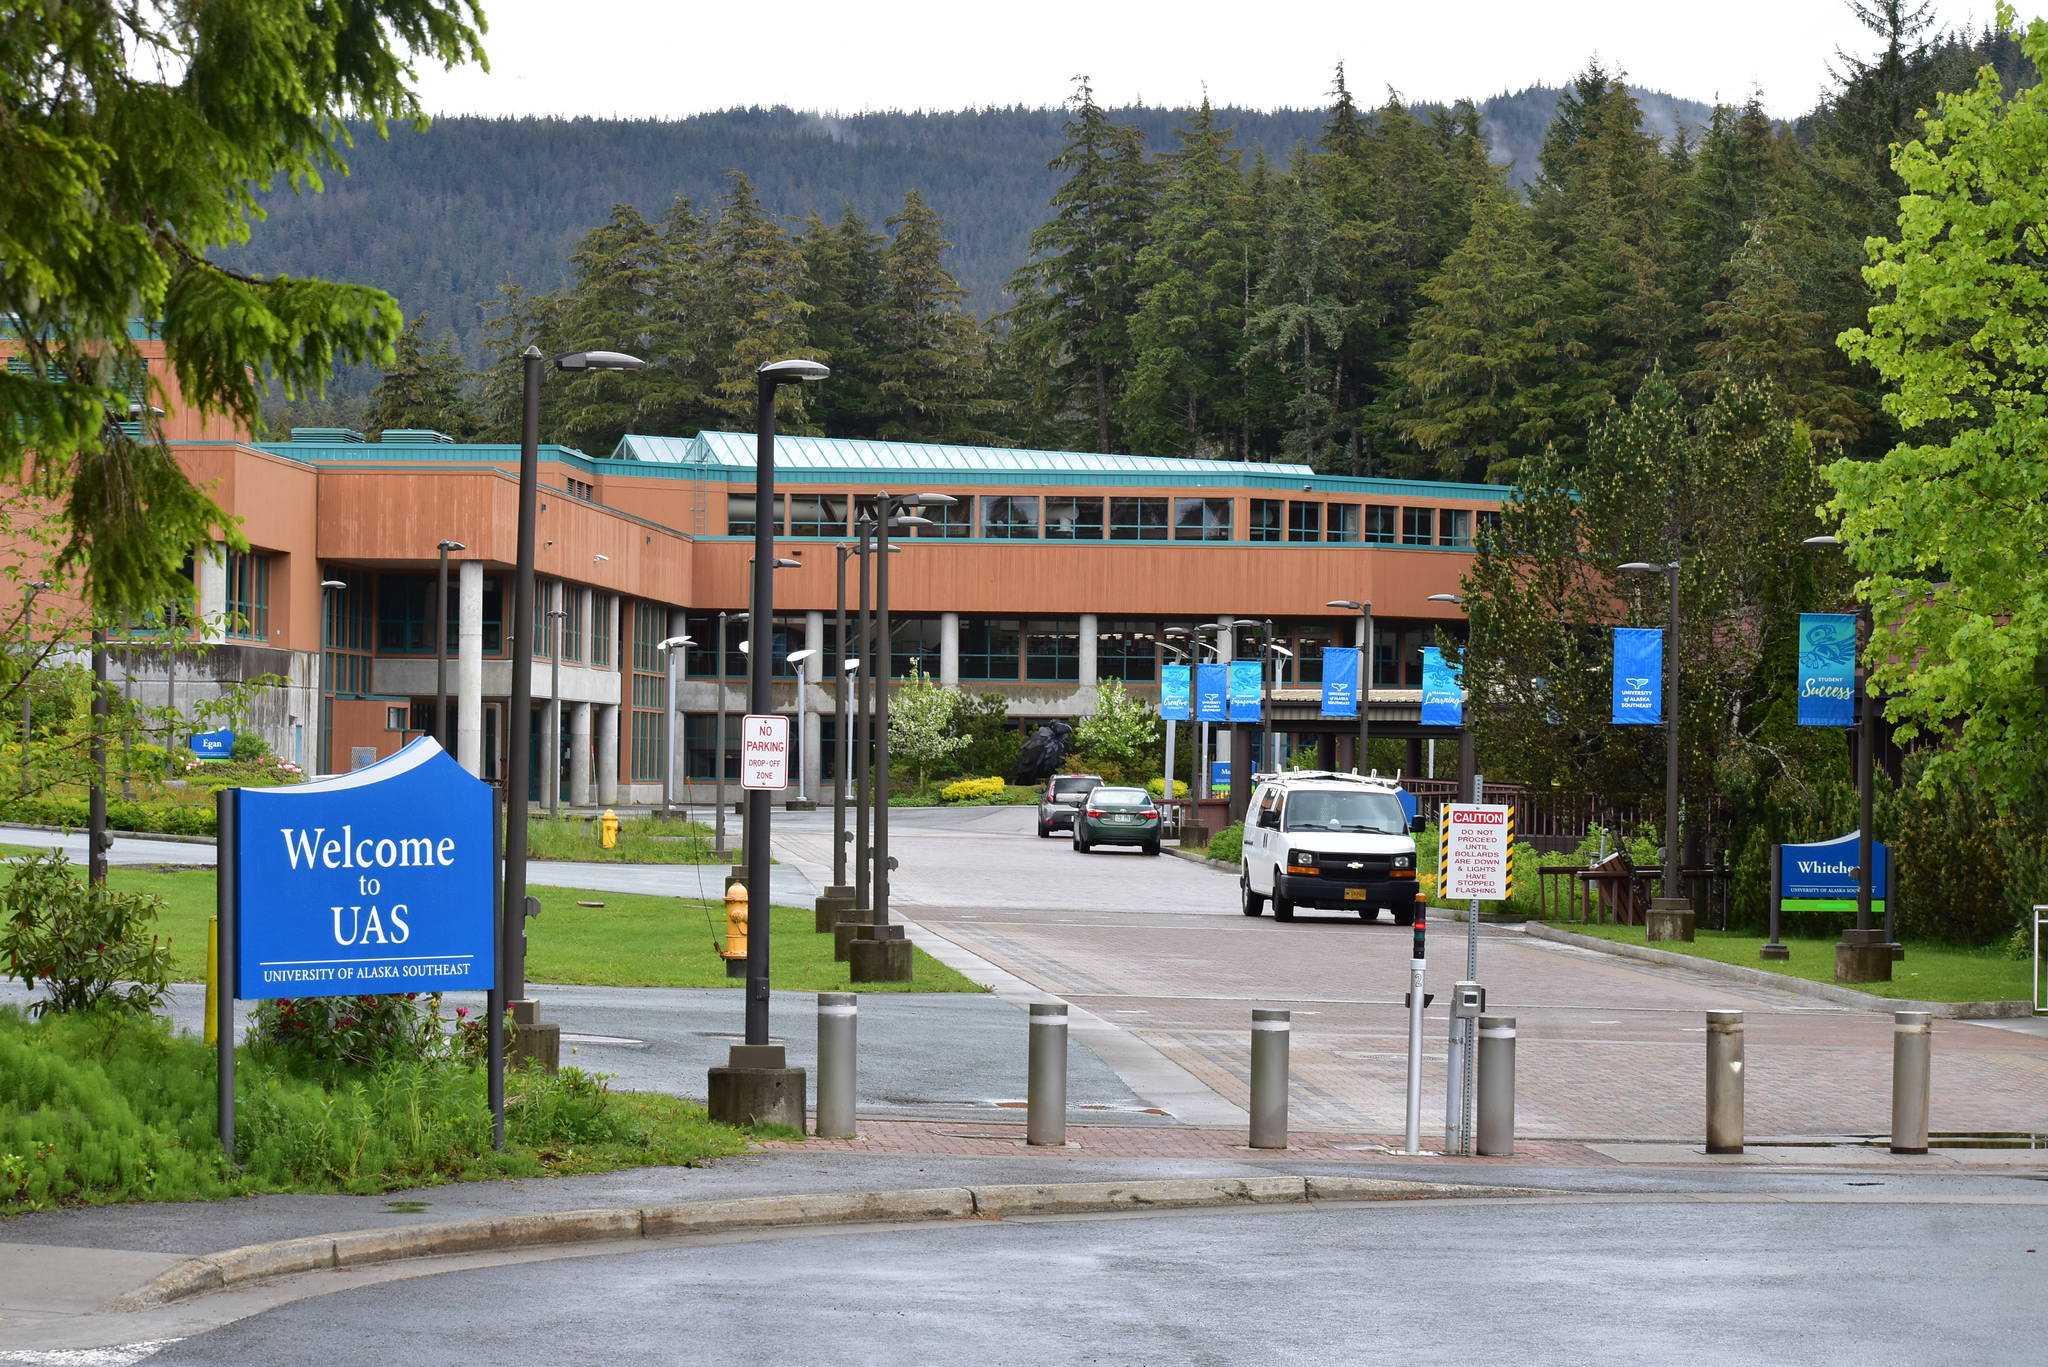 The University of Alaska Southeast campus on Monday, June 1, 2020. UAS could be merged with one of the other schools in the UA system, but that’s just one of many options facing the University of Alaska Board of Regents at their meeting Thursday and Friday. (Peter Segall | Juneau Empire)